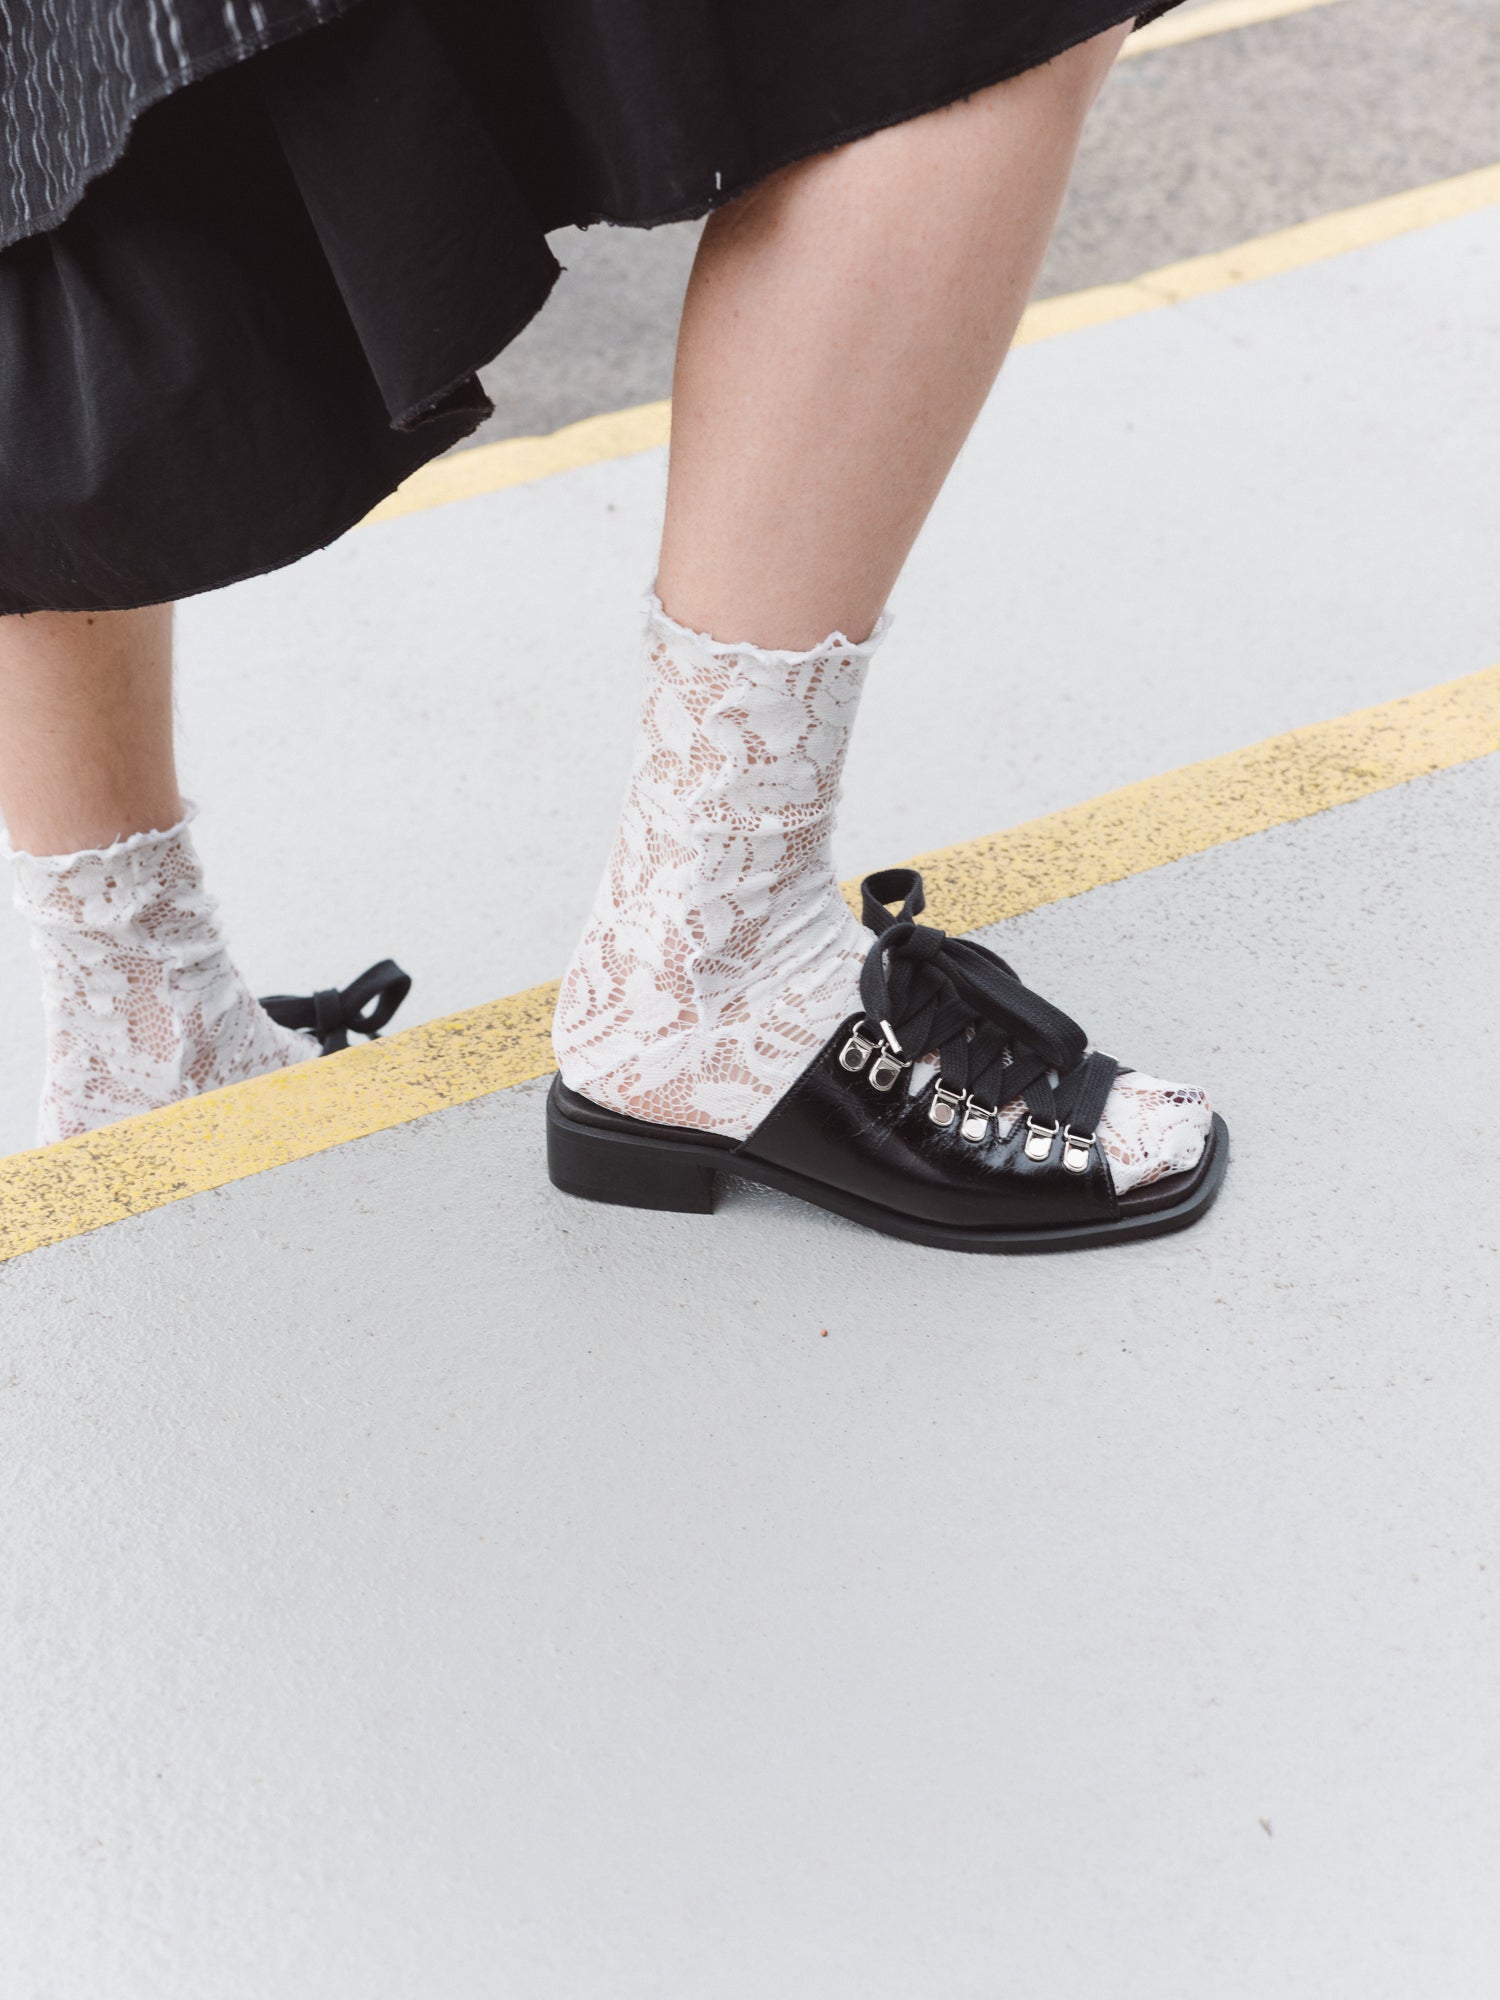 P.S.S X SYRUP LACE SOCK